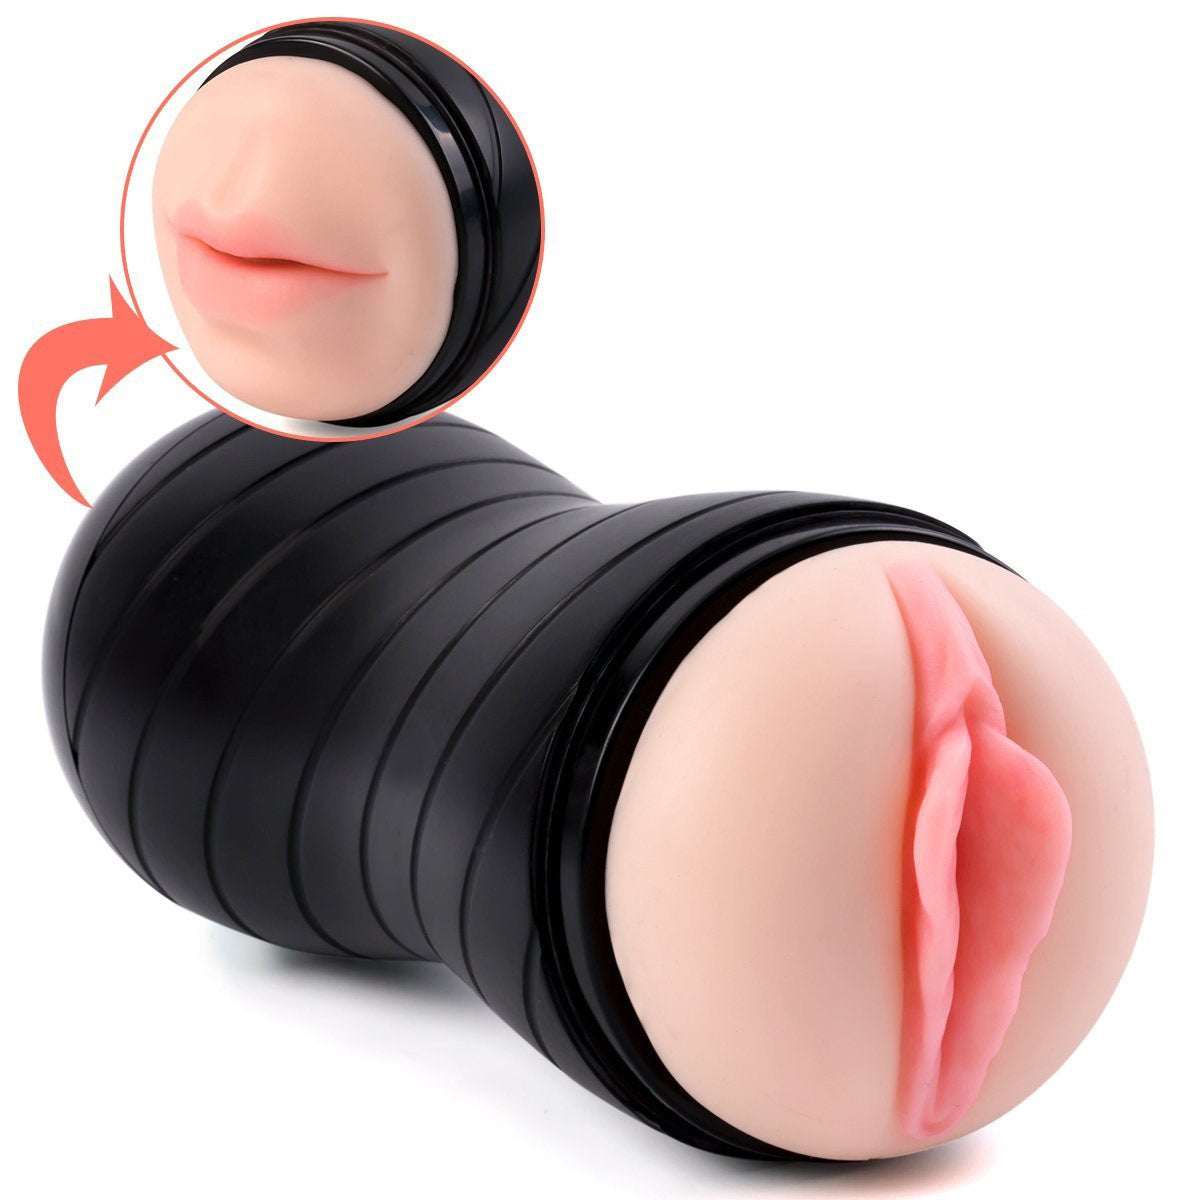 3 in 1 Male Masturbators Adult Sex Toys with Realistic Textured Mouth Vagina and Tight Anus, Men's Pocket Pussy Blowjob Stroker Anal Play Sex Toys for Men Masturbation